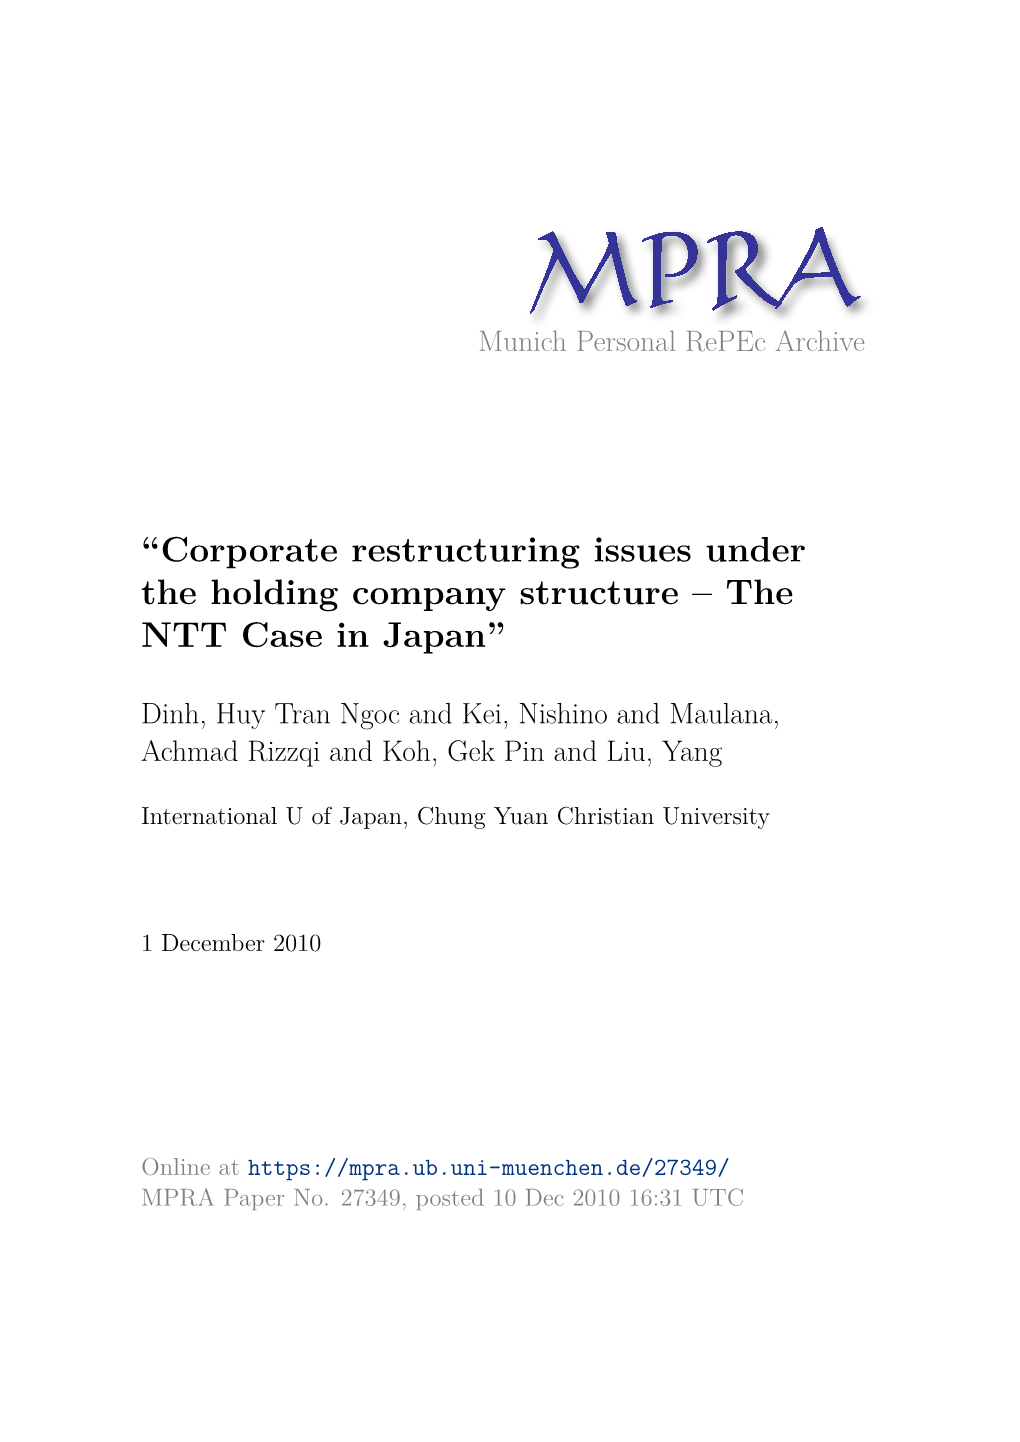 Corporate Restructuring Issues Under the Holding Company Structure – the NTT Case in Japan”